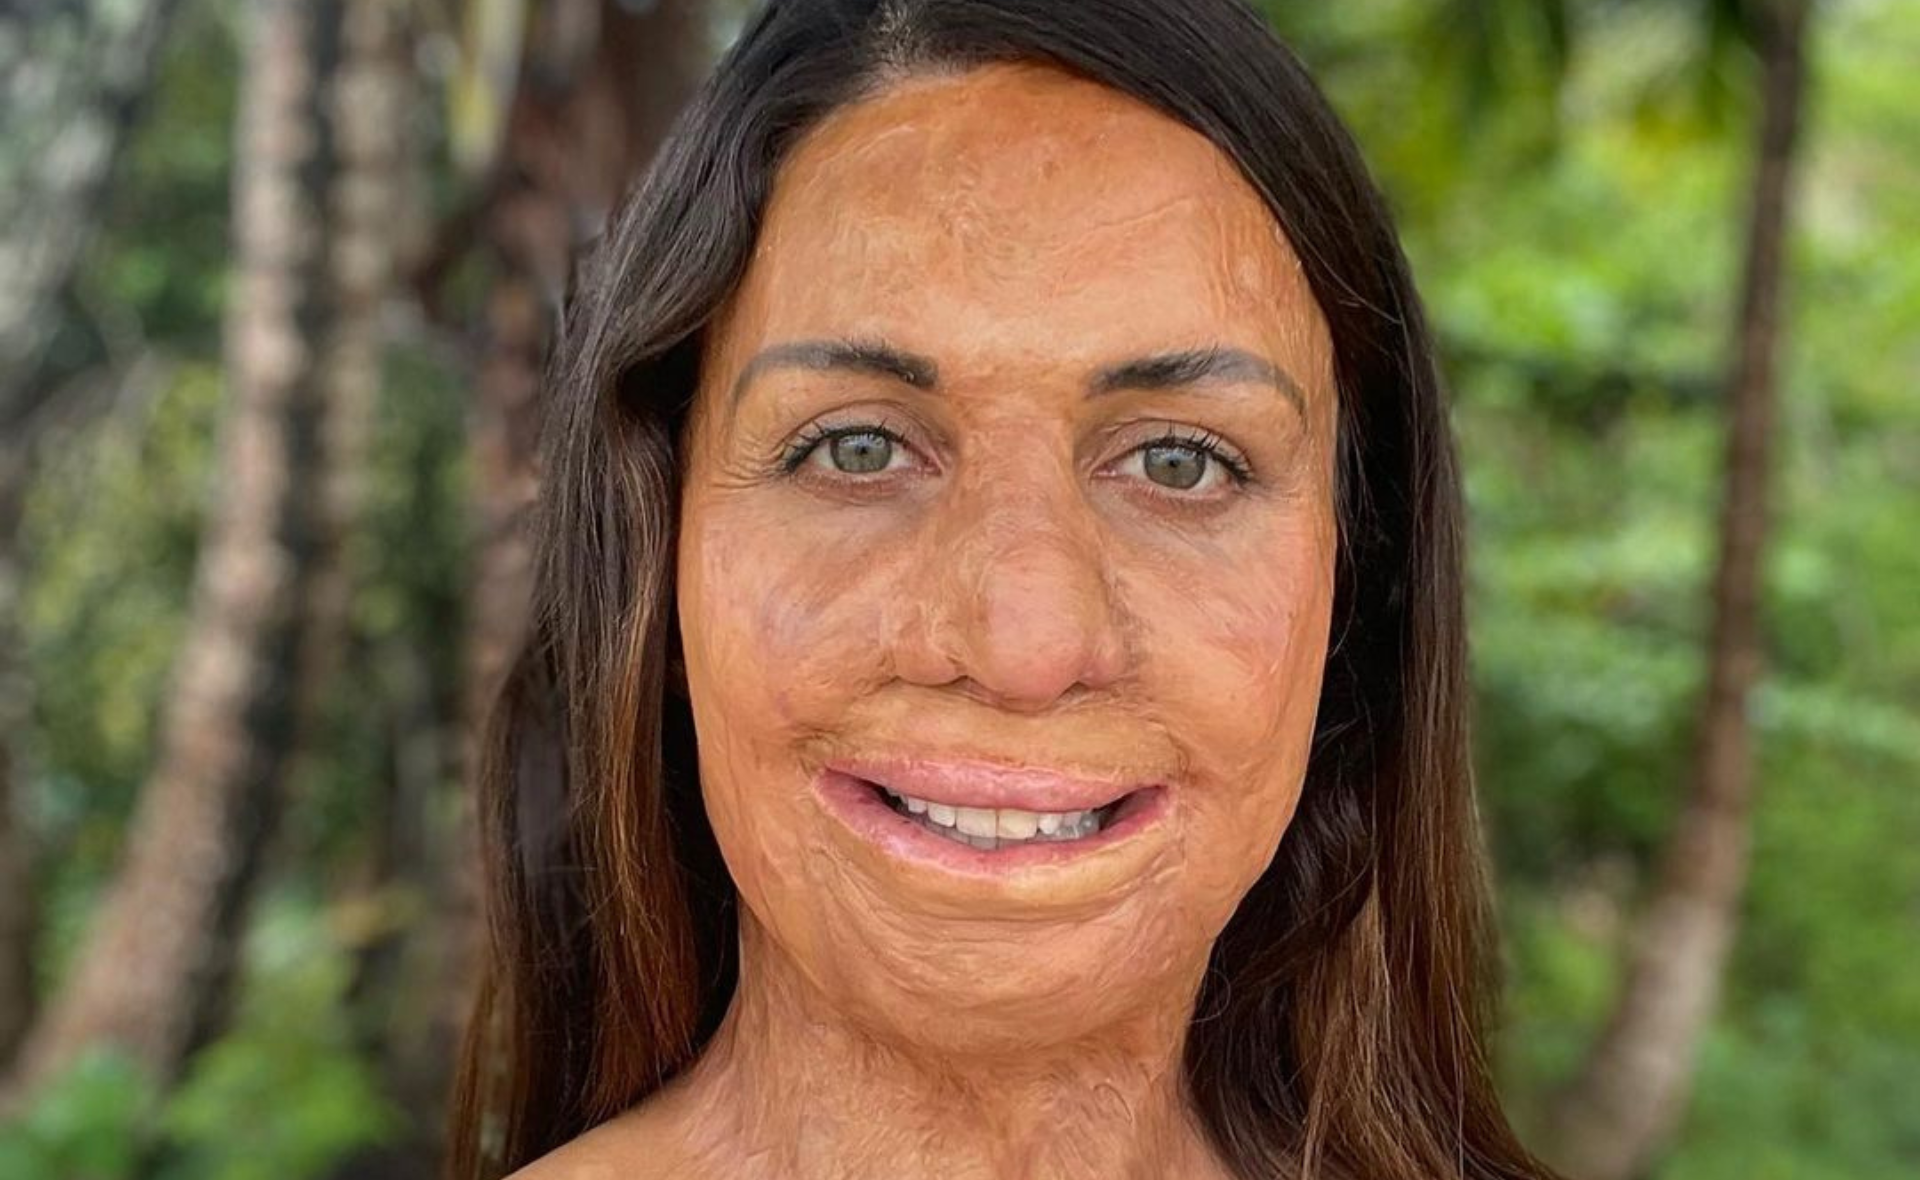 Turia Pitt confesses she was distraught after finding “confronting” images taken days after the fire